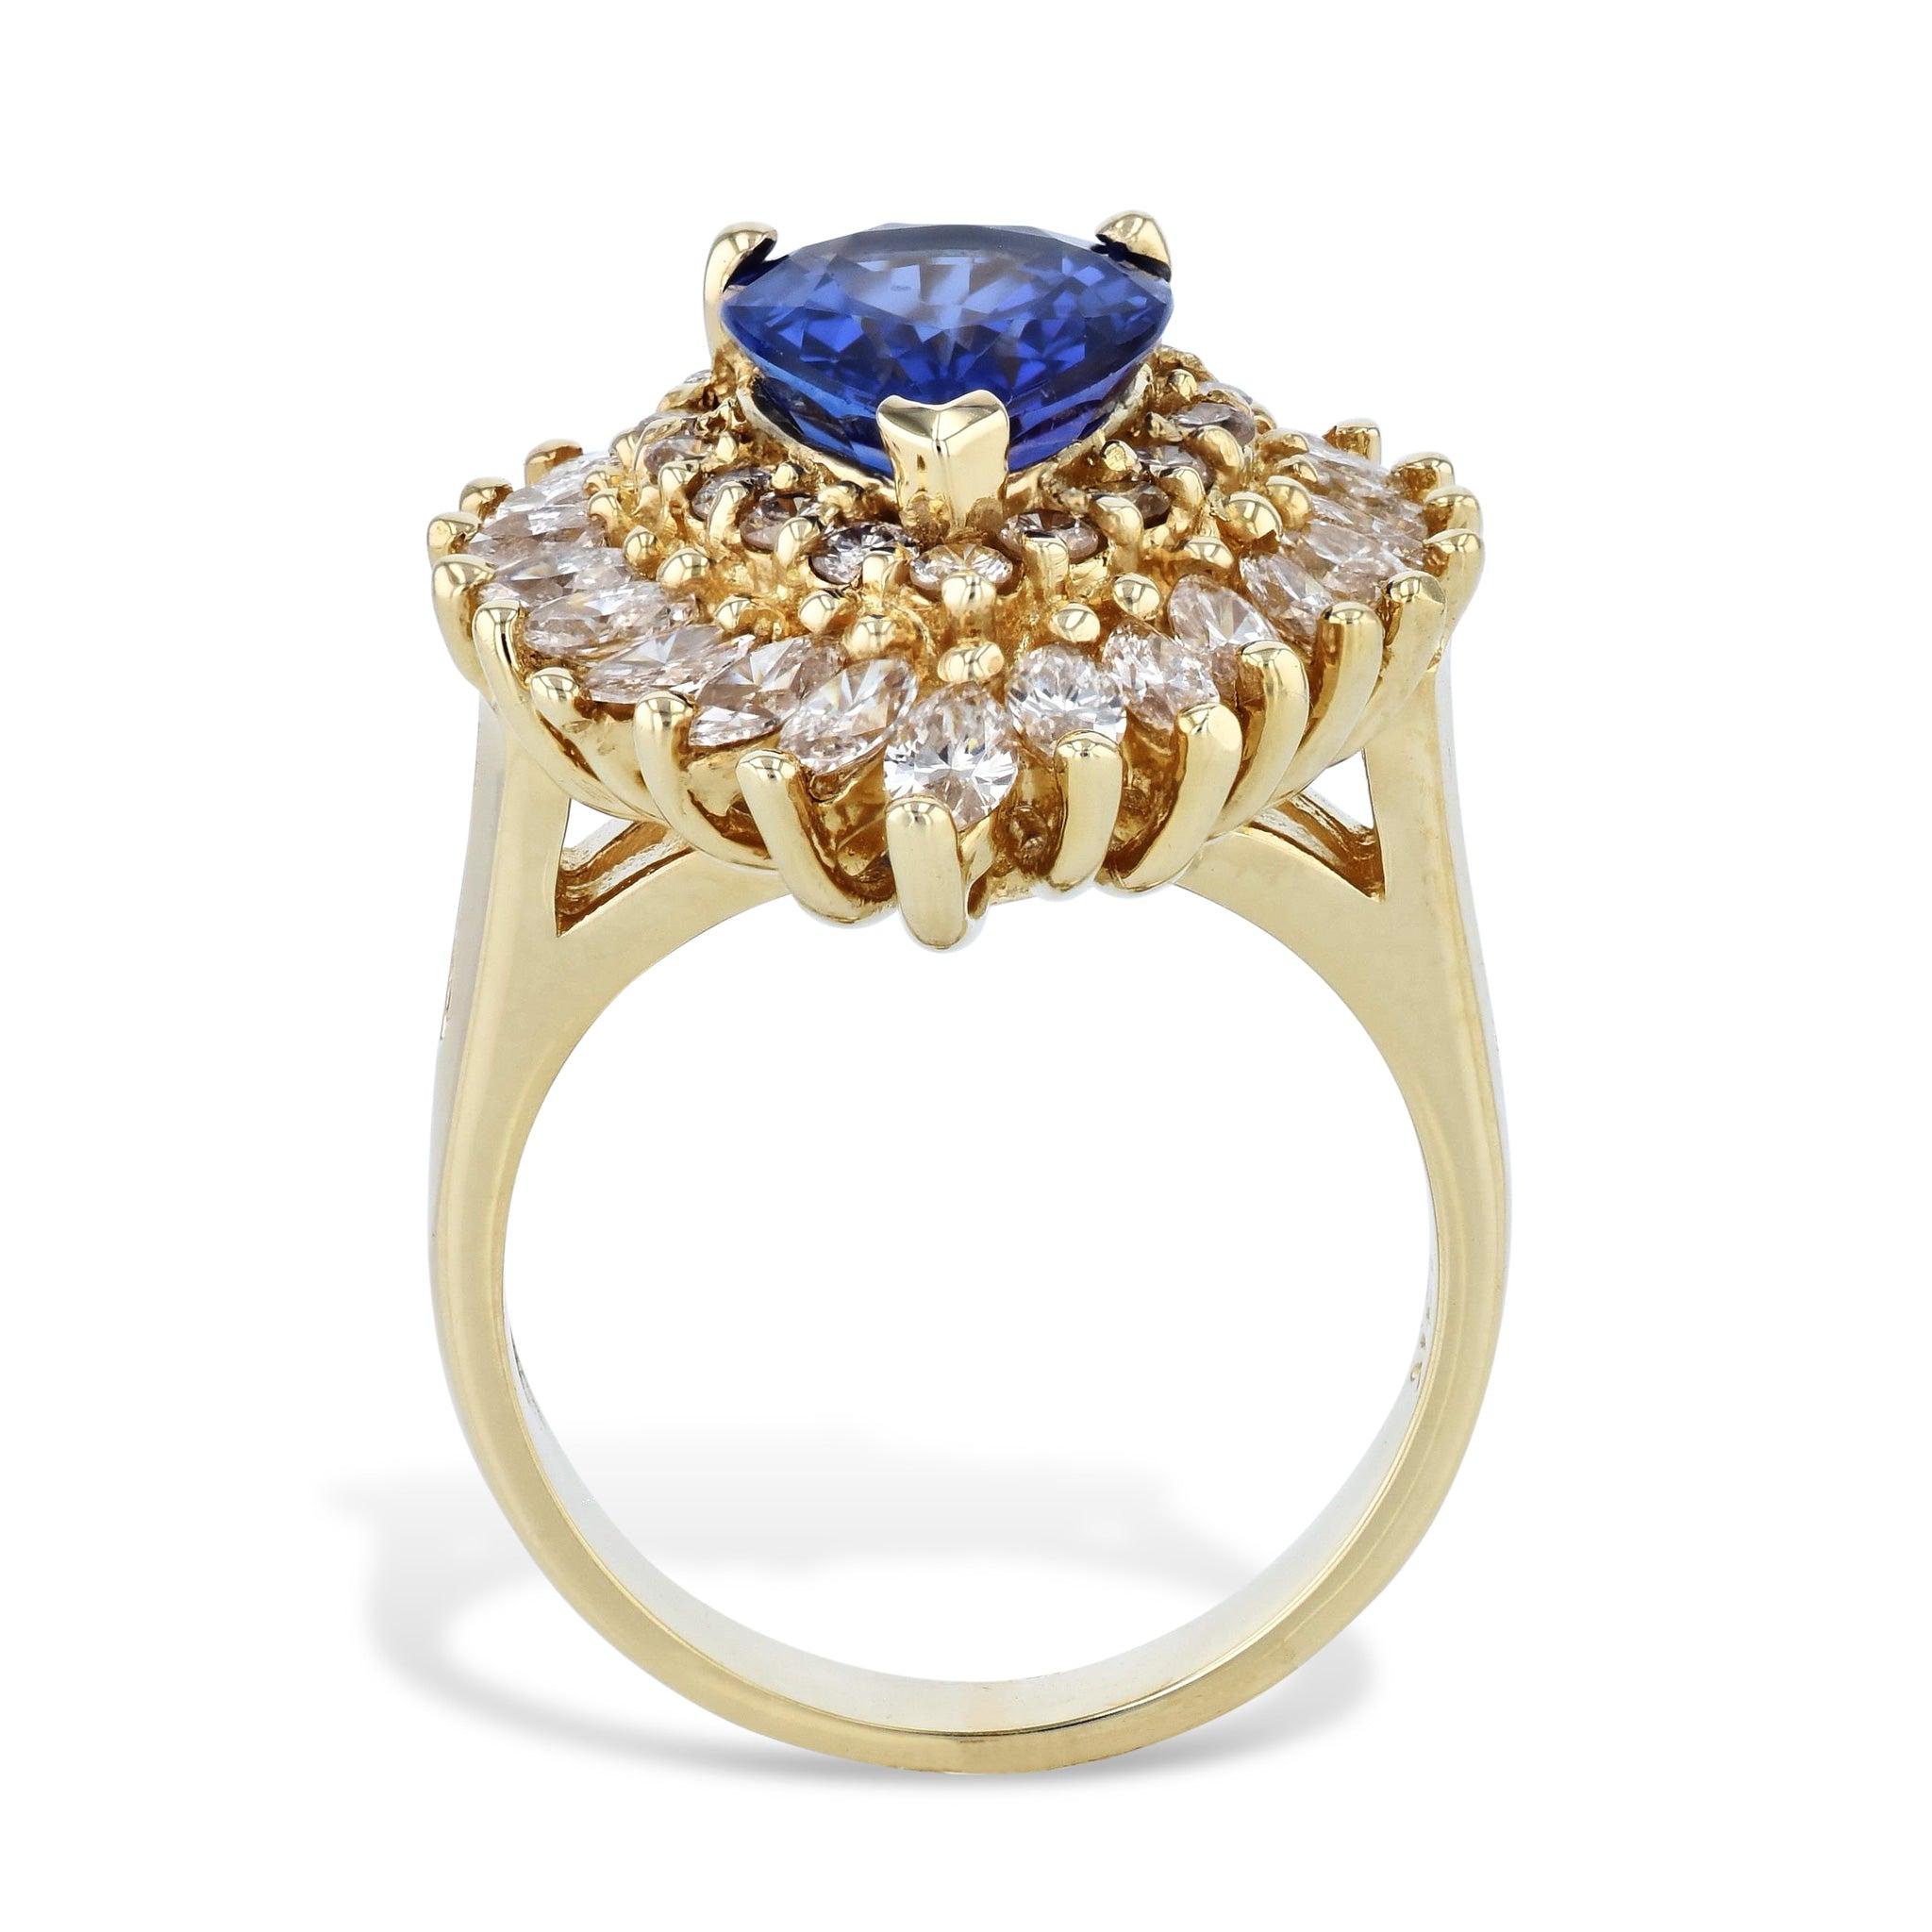 Be captivated by the luxurious beauty of this Tanzanite Diamond Yellow Gold Estate Ring. Crafted with 14kt. yellow gold, this piece radiates sophistication with a 2.90ct Tanzanite in its center and 23pcs Marquise shape Diamondsand 16pcs Round